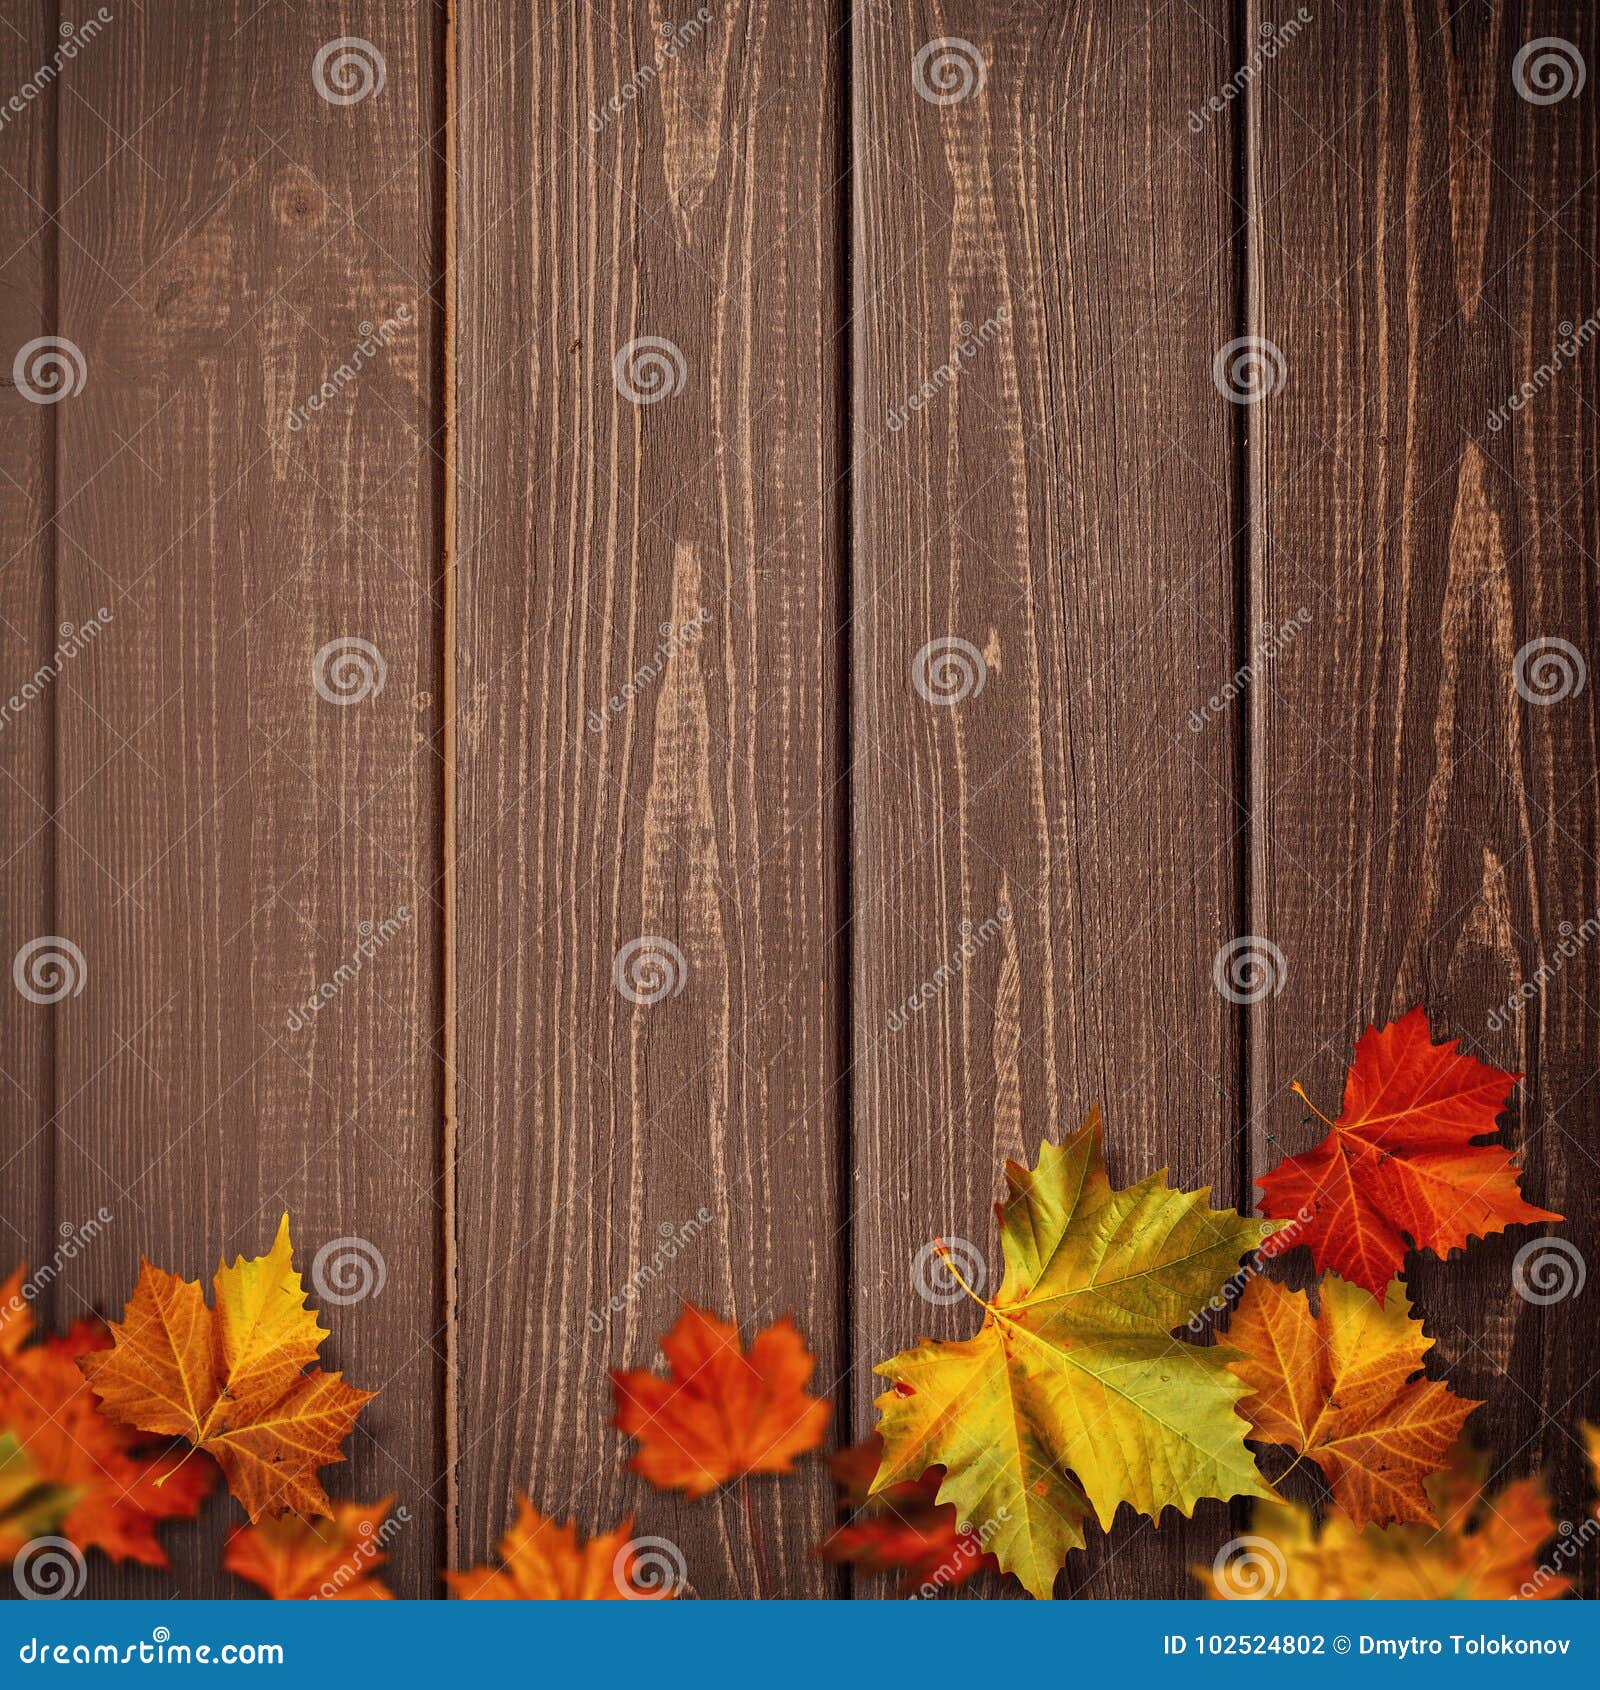 abstract autumnal backgrounds. fall maple leaves